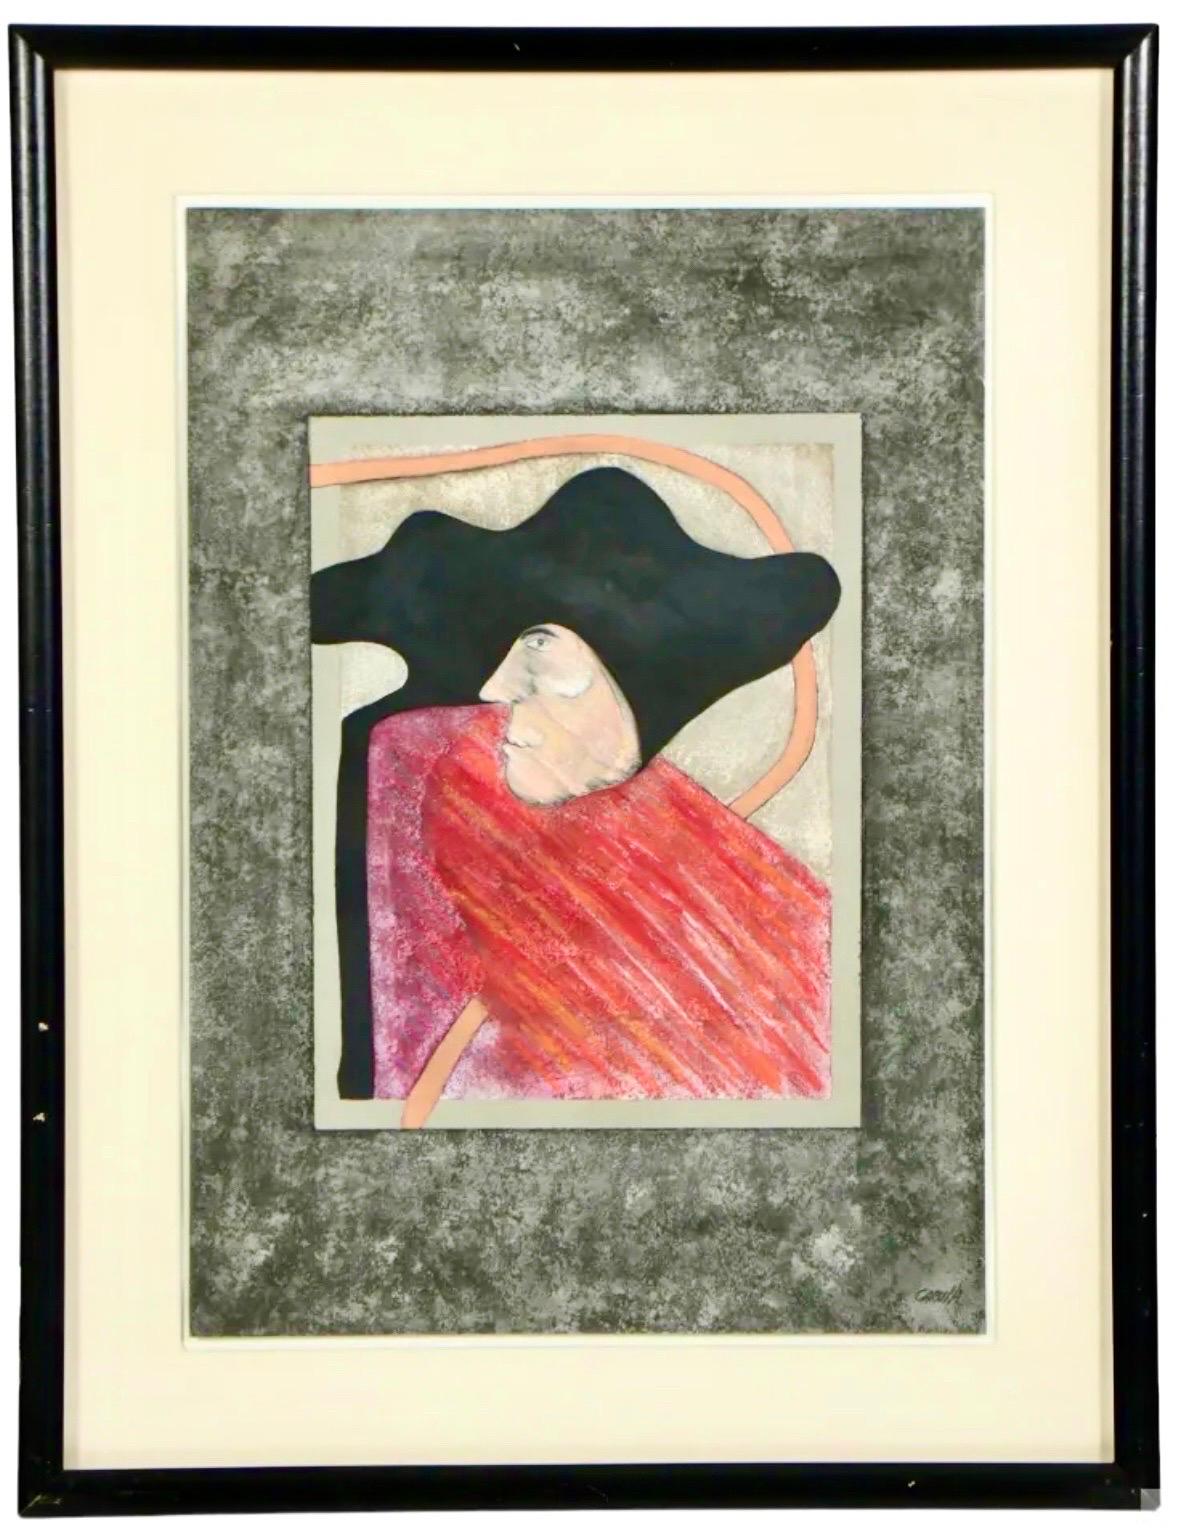 Ramon Antonio Carulla (Cuban, born 1936). 
Artist signature to lower right. Label verso. Retains original JOY MOOS GALLERY label. 
Dimensions: 38.5 X 28 inches.  Paper is 28 X 19.5 inches.
This painting is a mixed media with oil paint, on paper
It